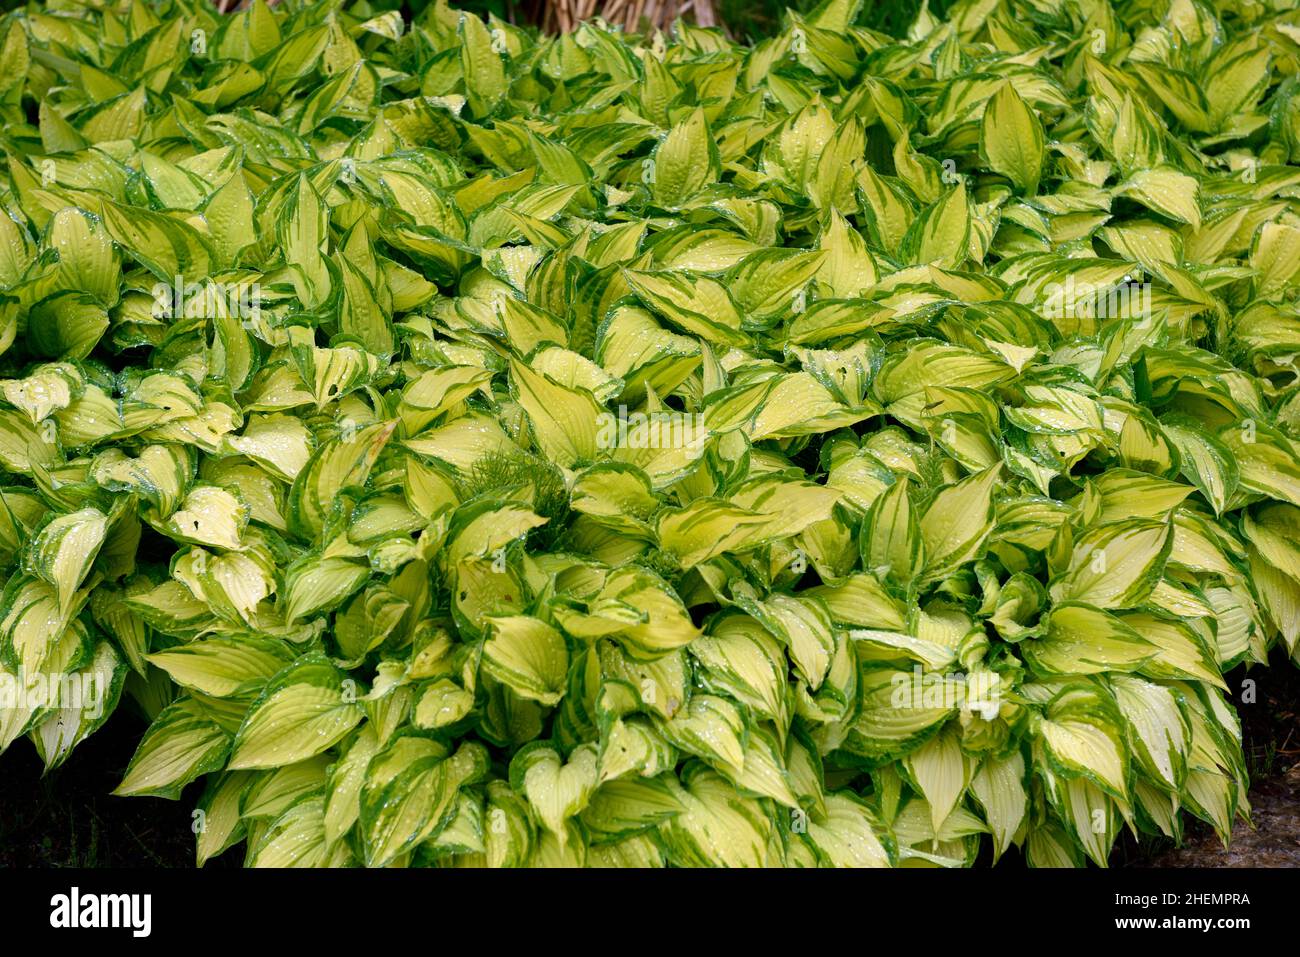 Hosta fortunei var albopicta,White-painted plantain lily,leaves,foliage,large clump of hosta,large hosta clump,clumps,mass,massed,planting scheme,shad Stock Photo